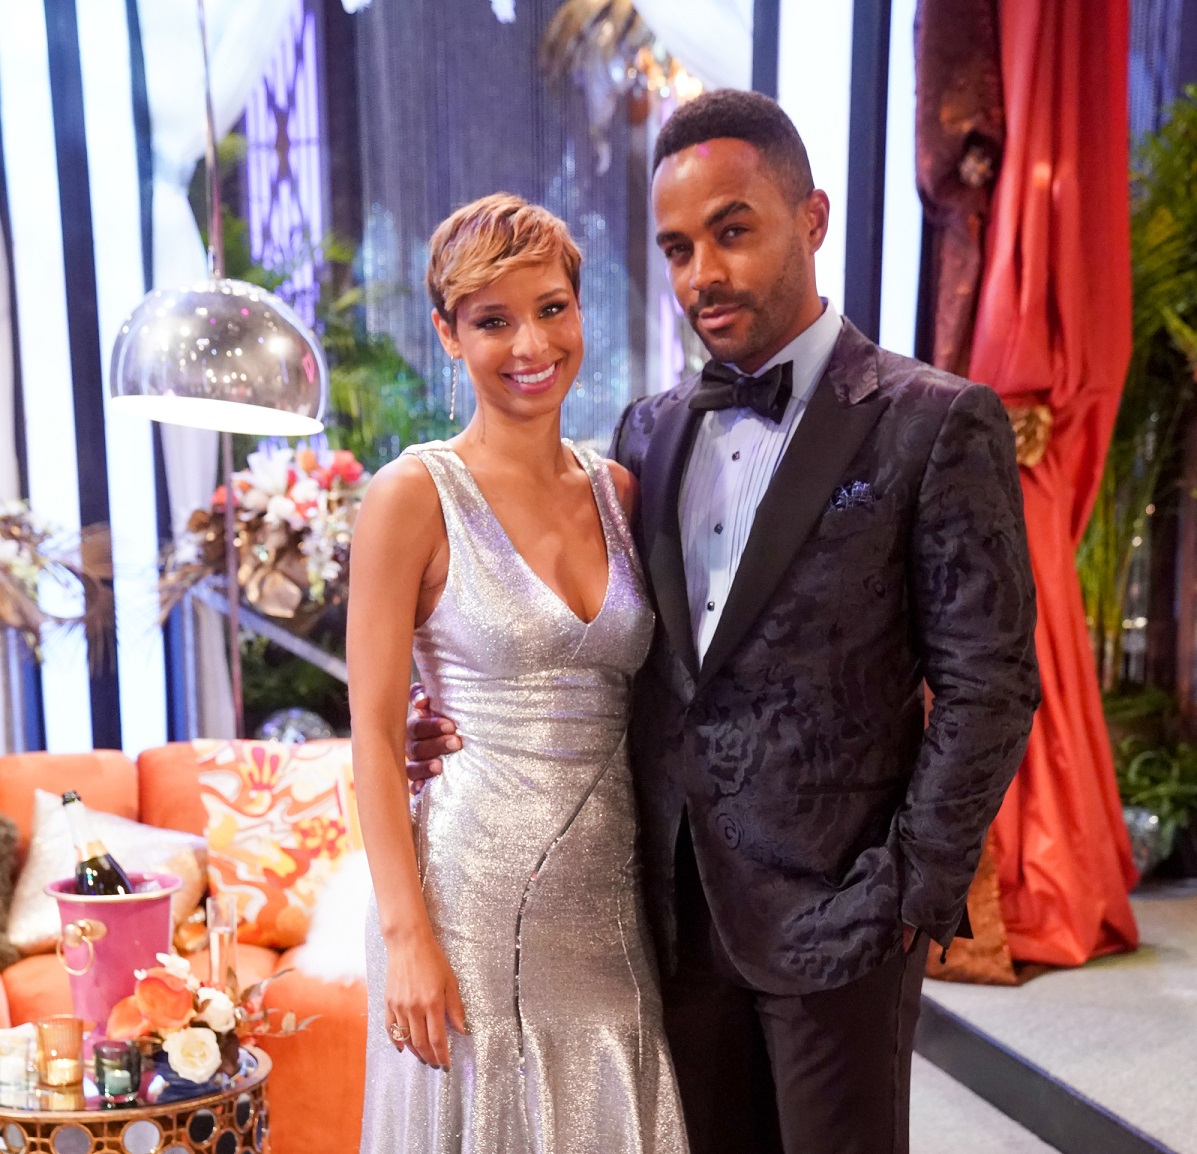 'The Young and the Restless' star Brytni Sarpy in a silver dress and Sean Dominic in a tuxedo pose on set of the soap opera.